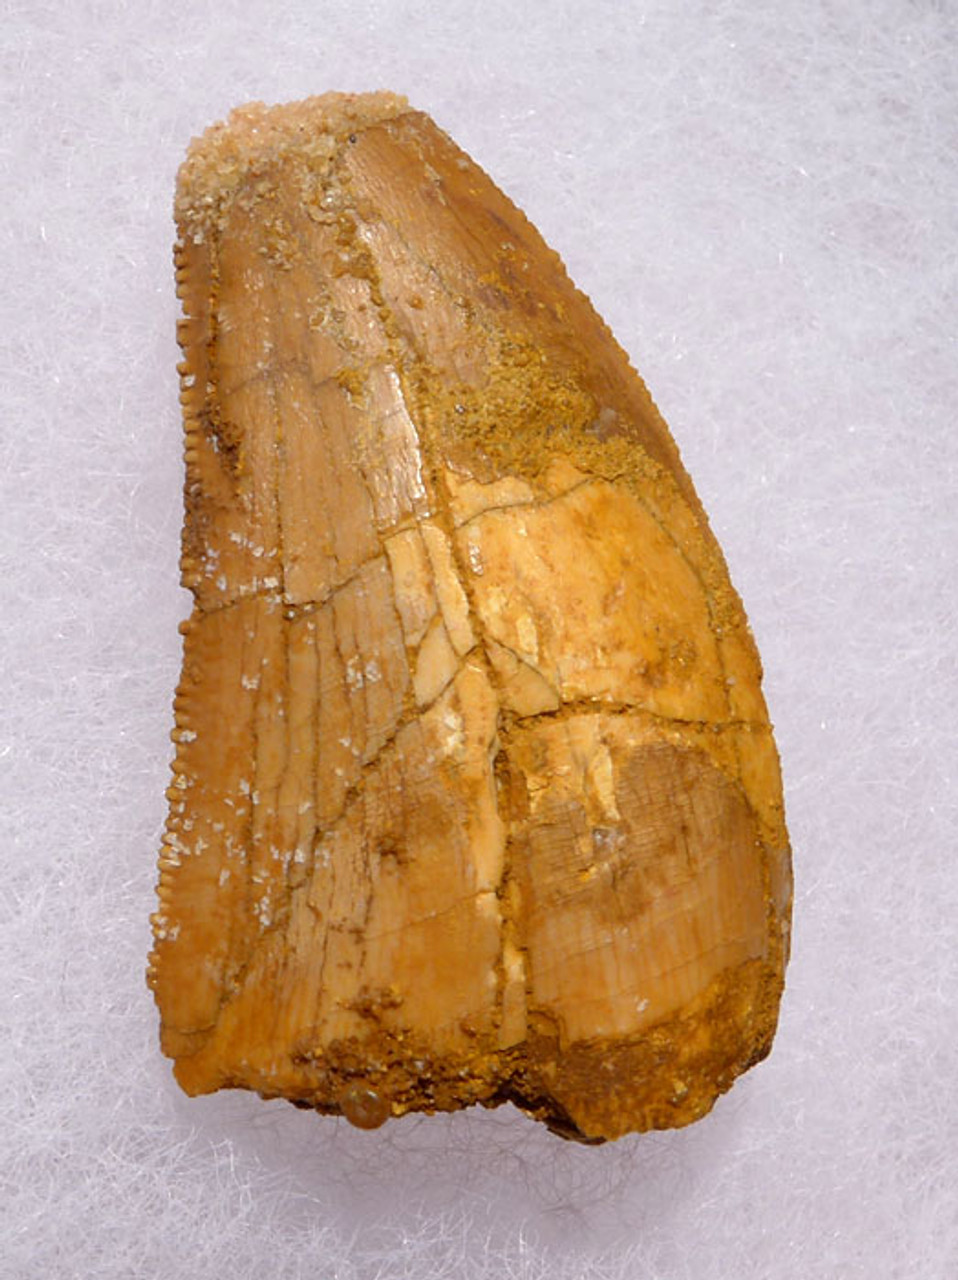 DT2-081 - CARCHARODONTOSAURUS FOSSIL TOOTH FROM THE LARGEST MEAT-EATING DINOSAUR 